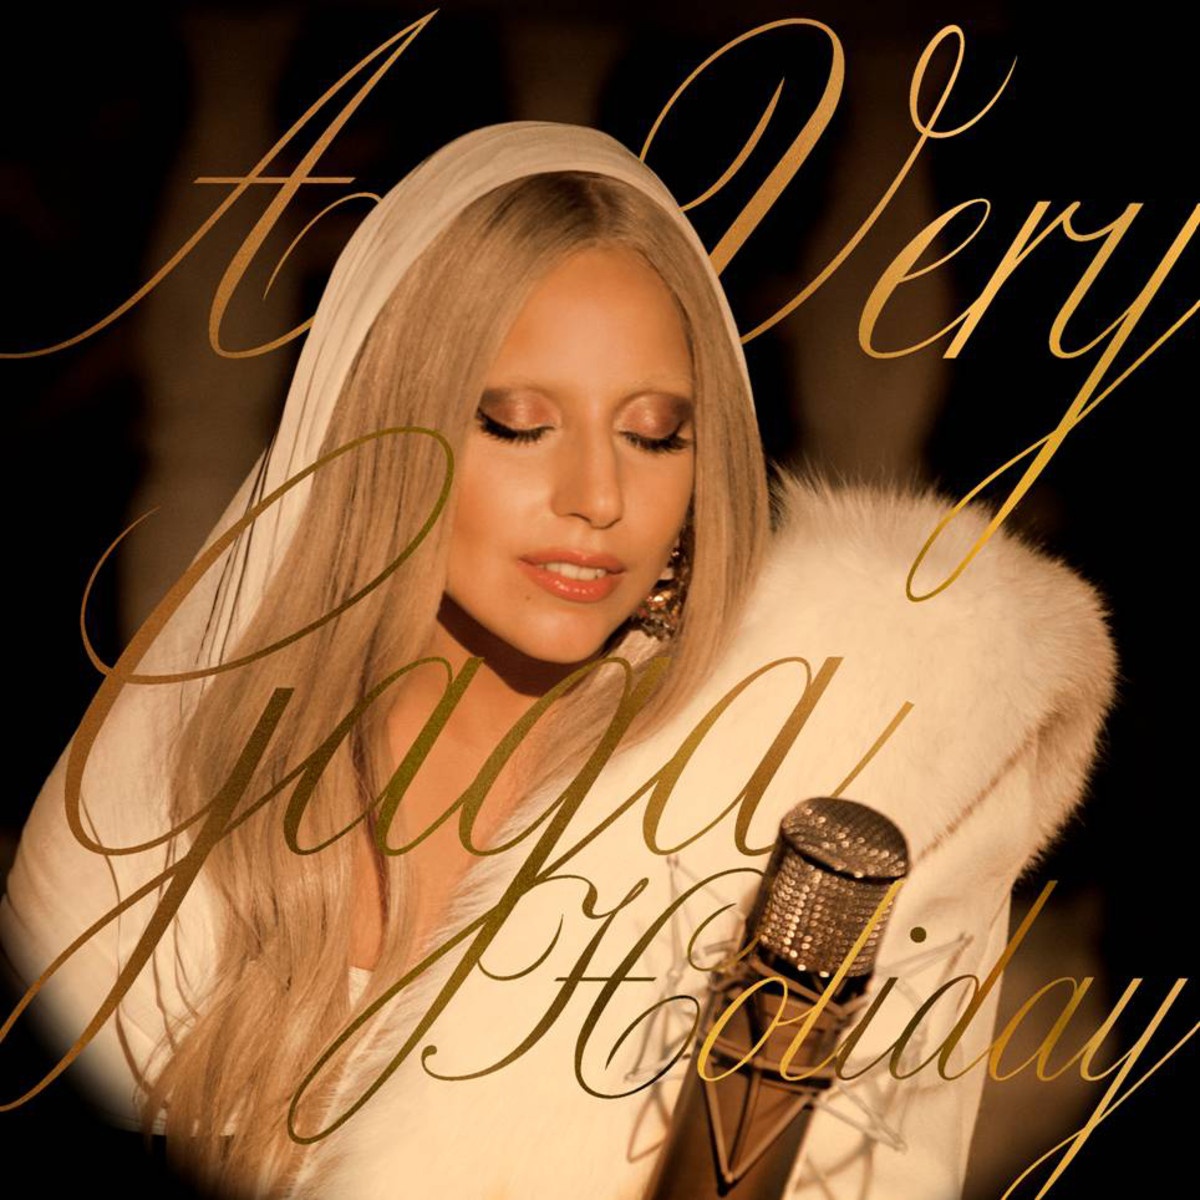 White Christmas - Live From "A Very Gaga Thanksgiving'"